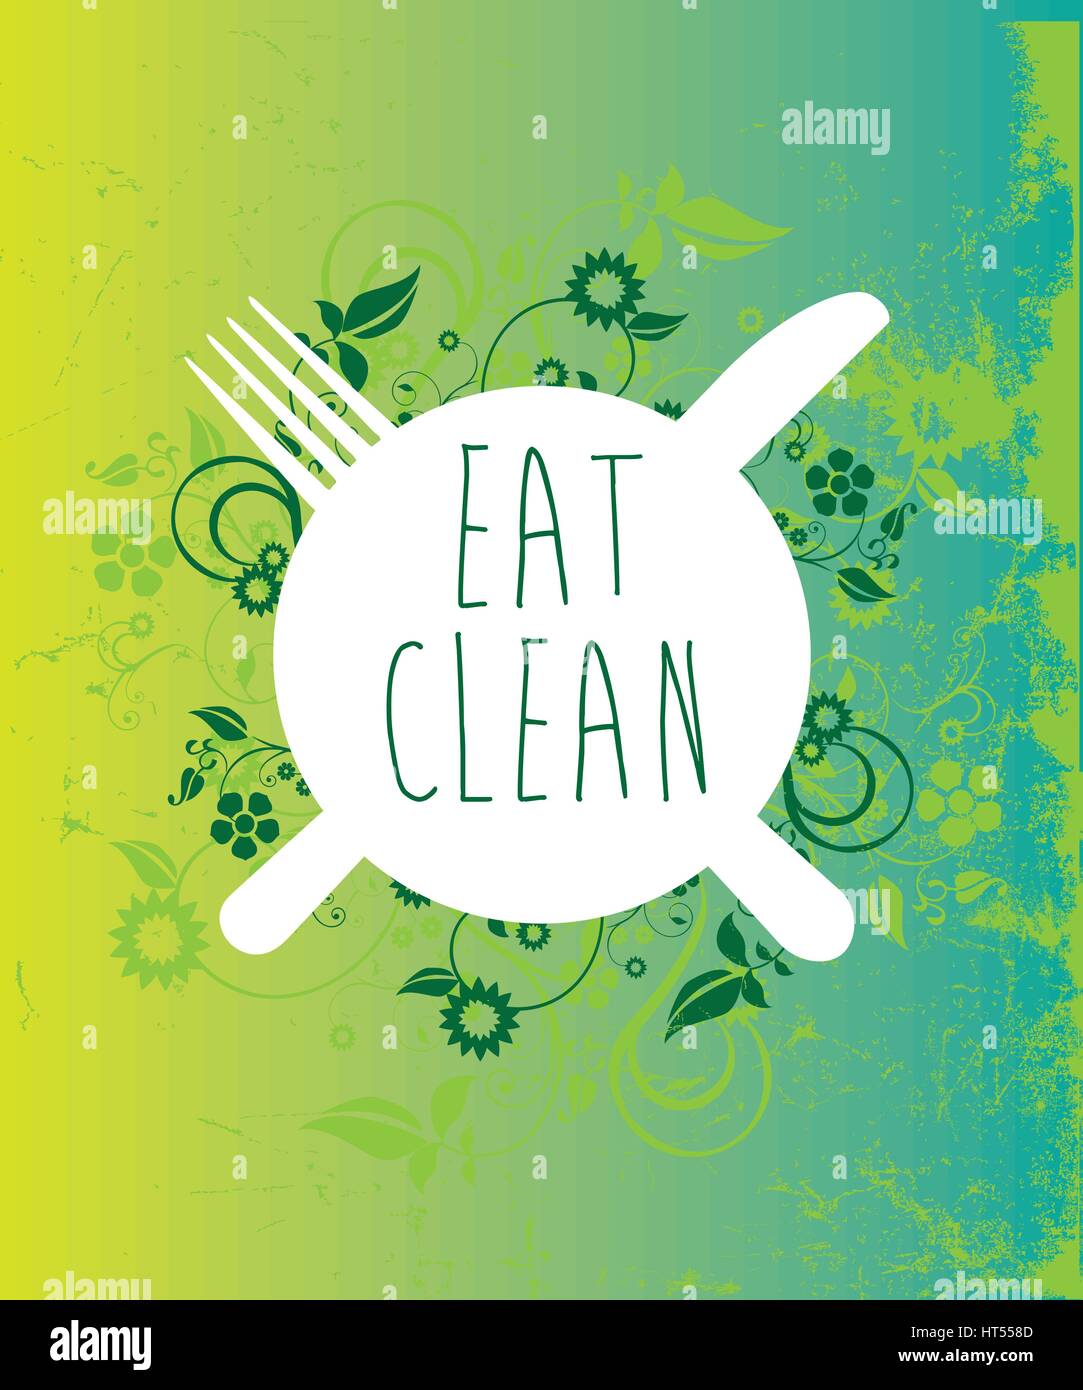 plate with eat clean message amongst grunge and floral design Stock Vector